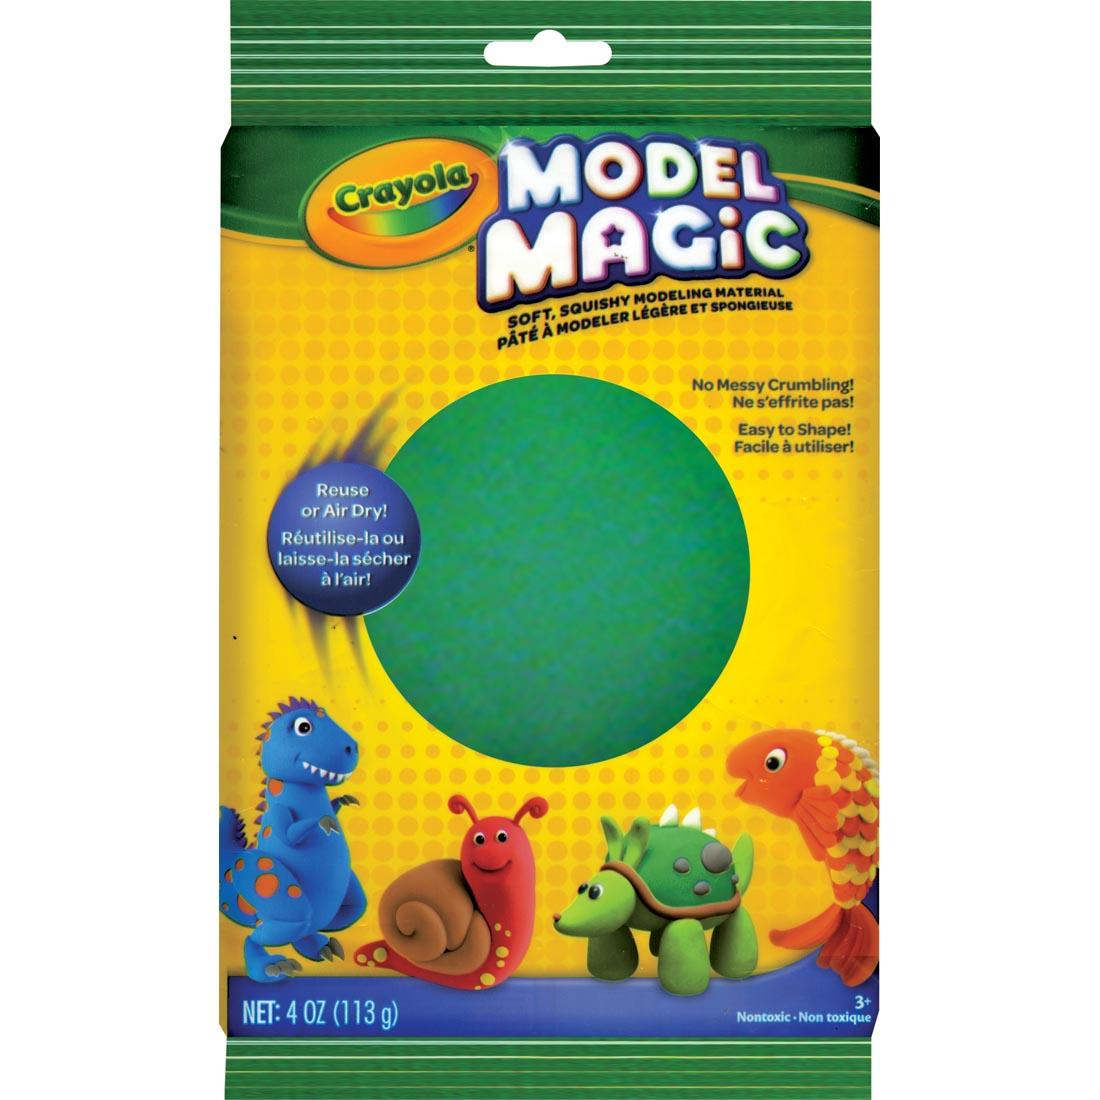 Package of Green Crayola Model Magic